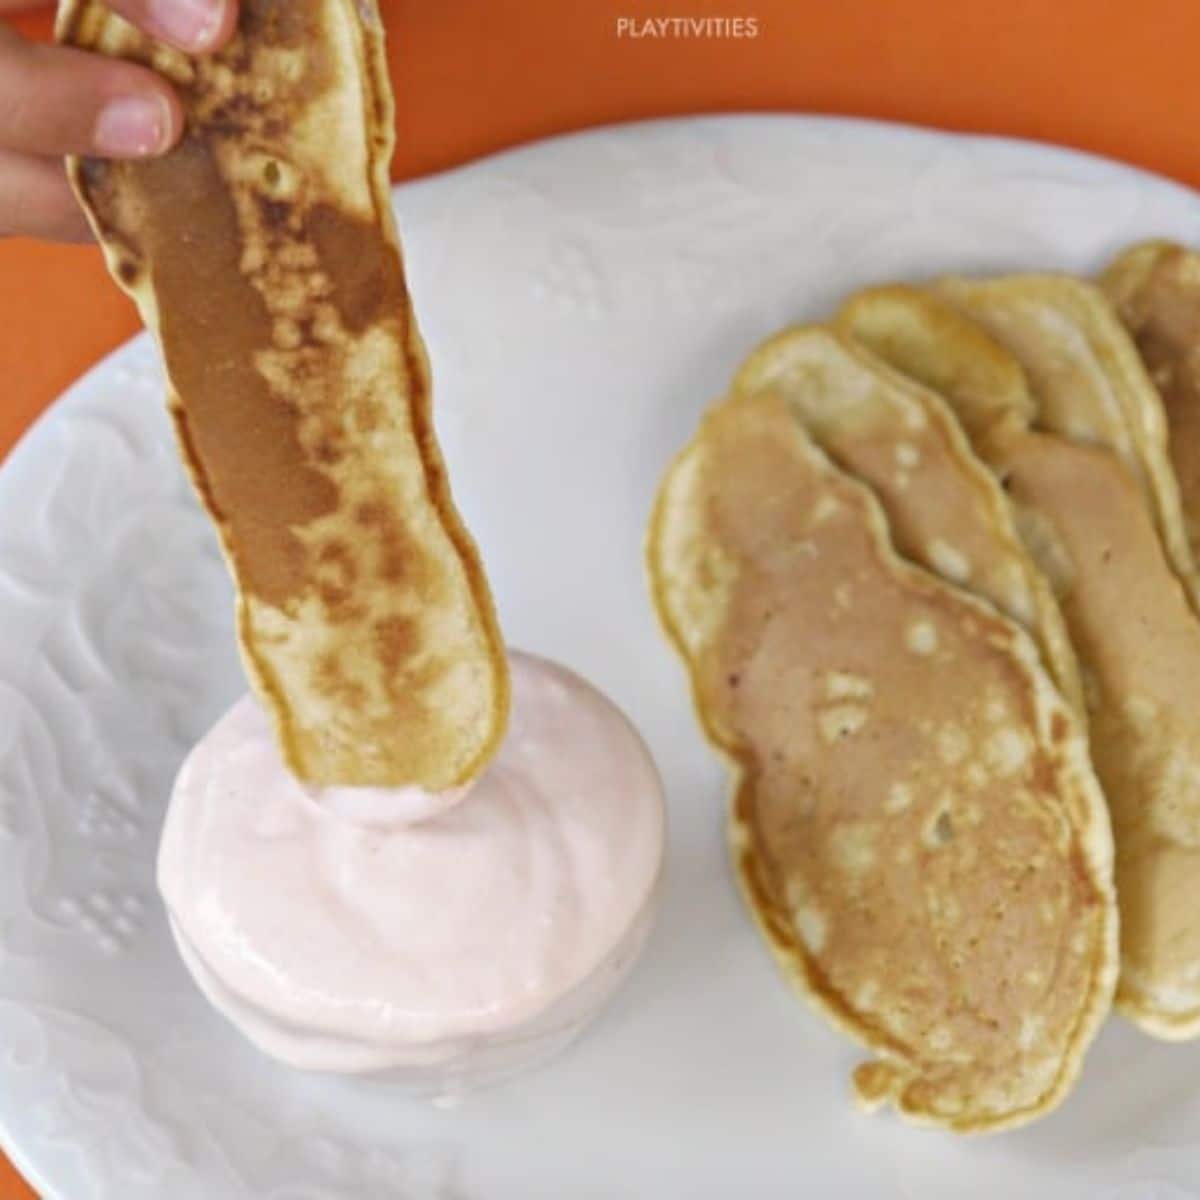 Pancake dippers with yogurt on a plate.